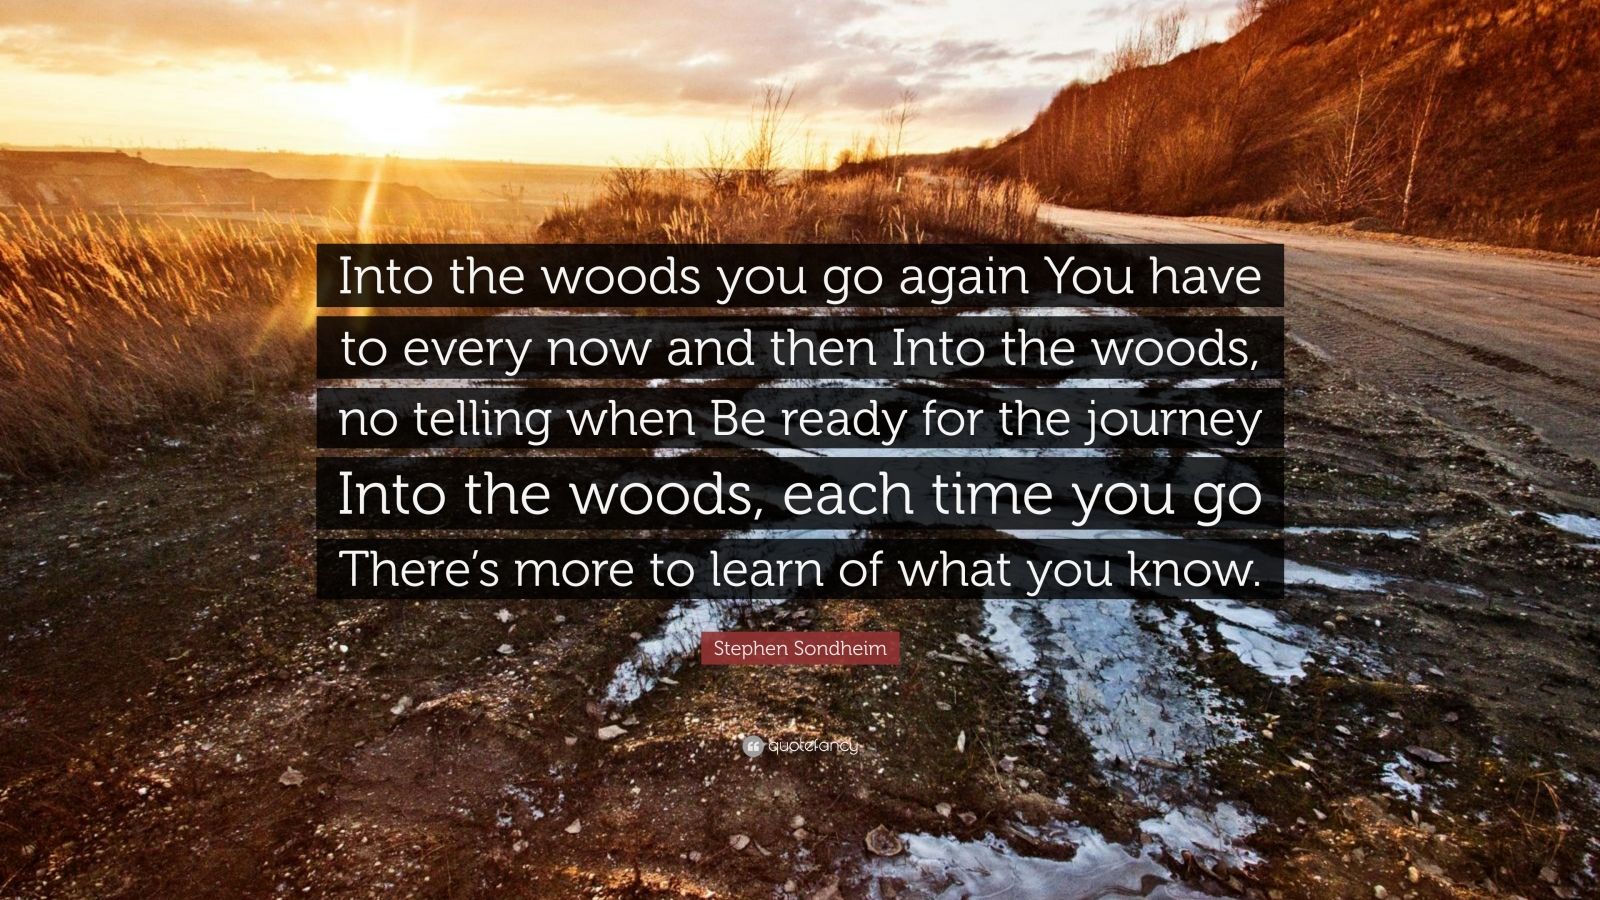 Stephen Sondheim Quote: “Into the woods you go again You have to every ...